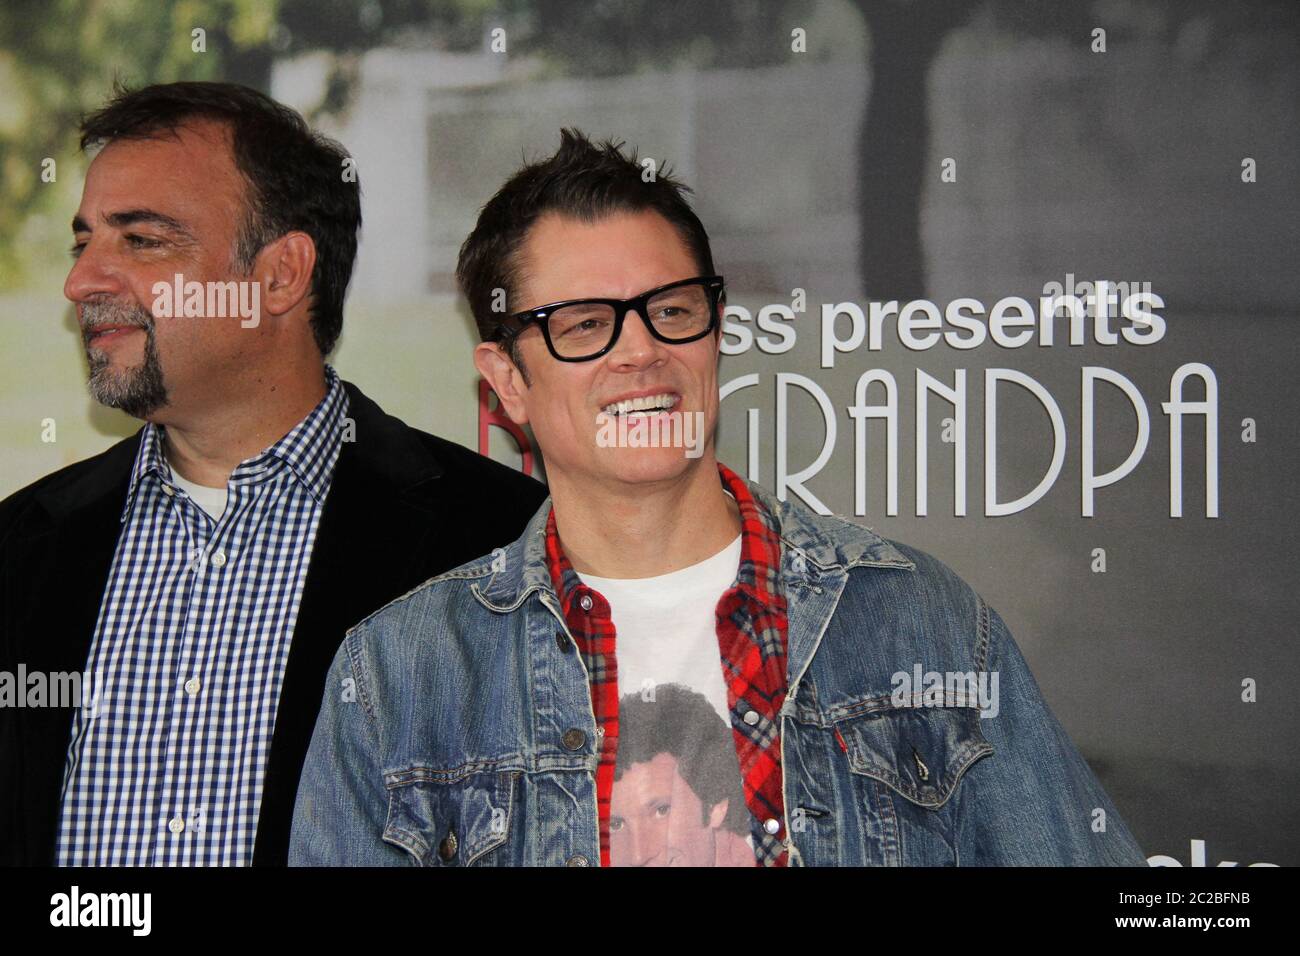 Johnny Knoxville ‘Irving Zisman’ and Producer Derek Freda arrive on the red carpet for the special screening of Jackass Presents: Bad Grandpa at Event Stock Photo